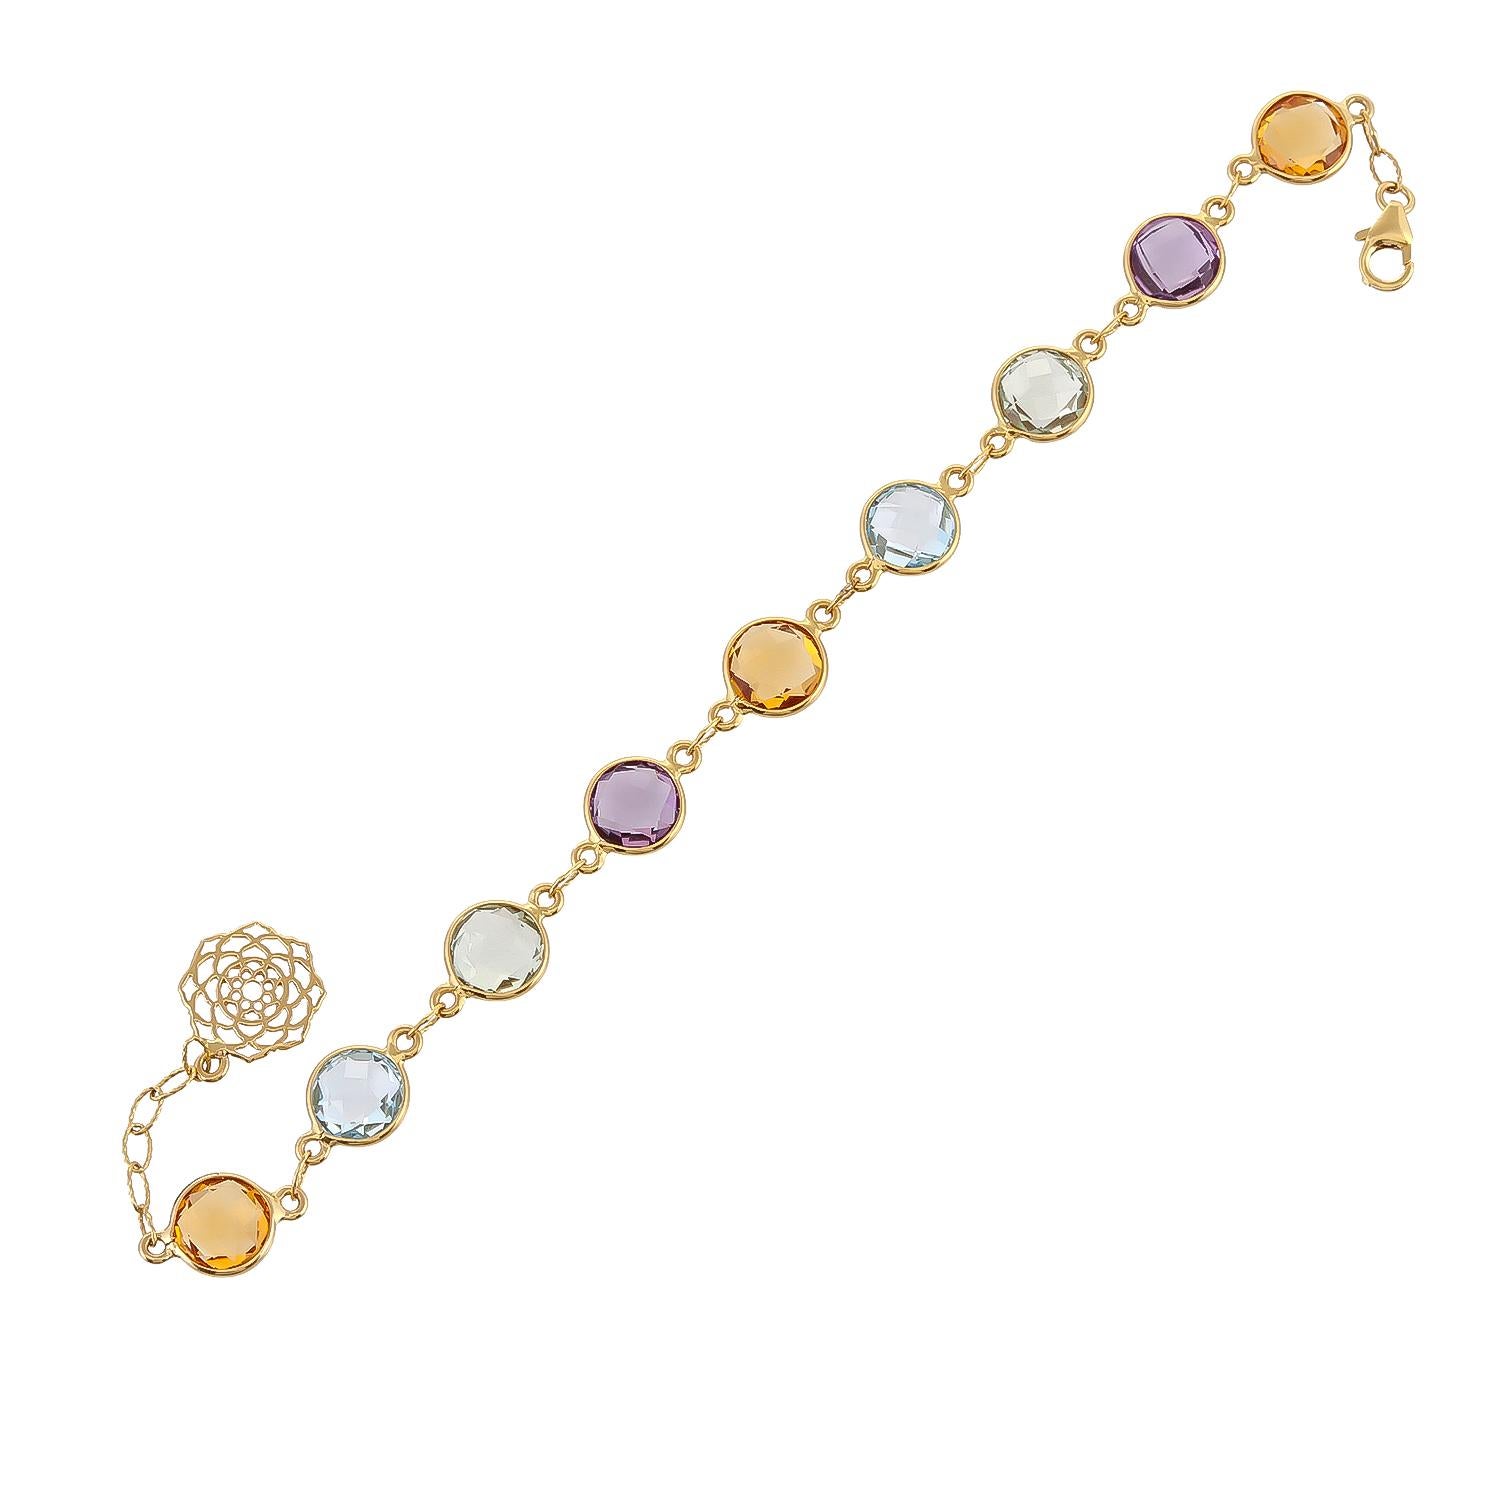 Simple 17.12ct briolettes round in various gems is perfect for your summer and spring wardrobe
The total length of bracelet - 8 inches
size of gemstones- 8X8 mm